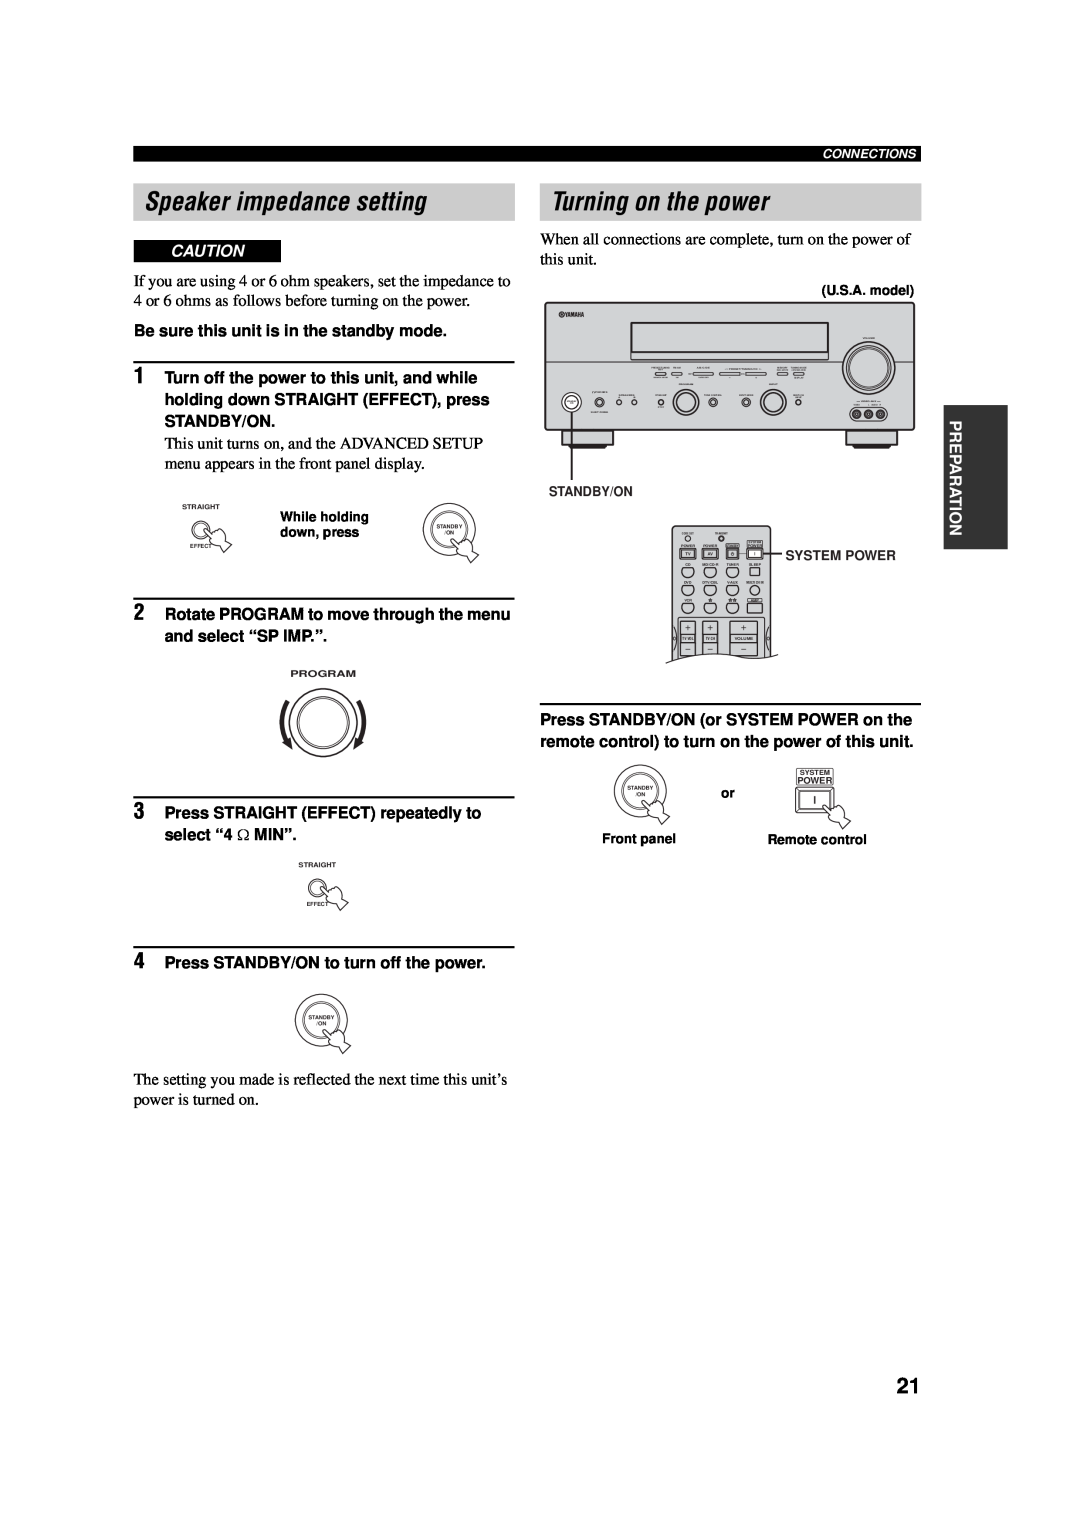 Yamaha AV Receiver Speaker impedance setting, Turning on the power, Be sure this unit is in the standby mode, Standby/On 